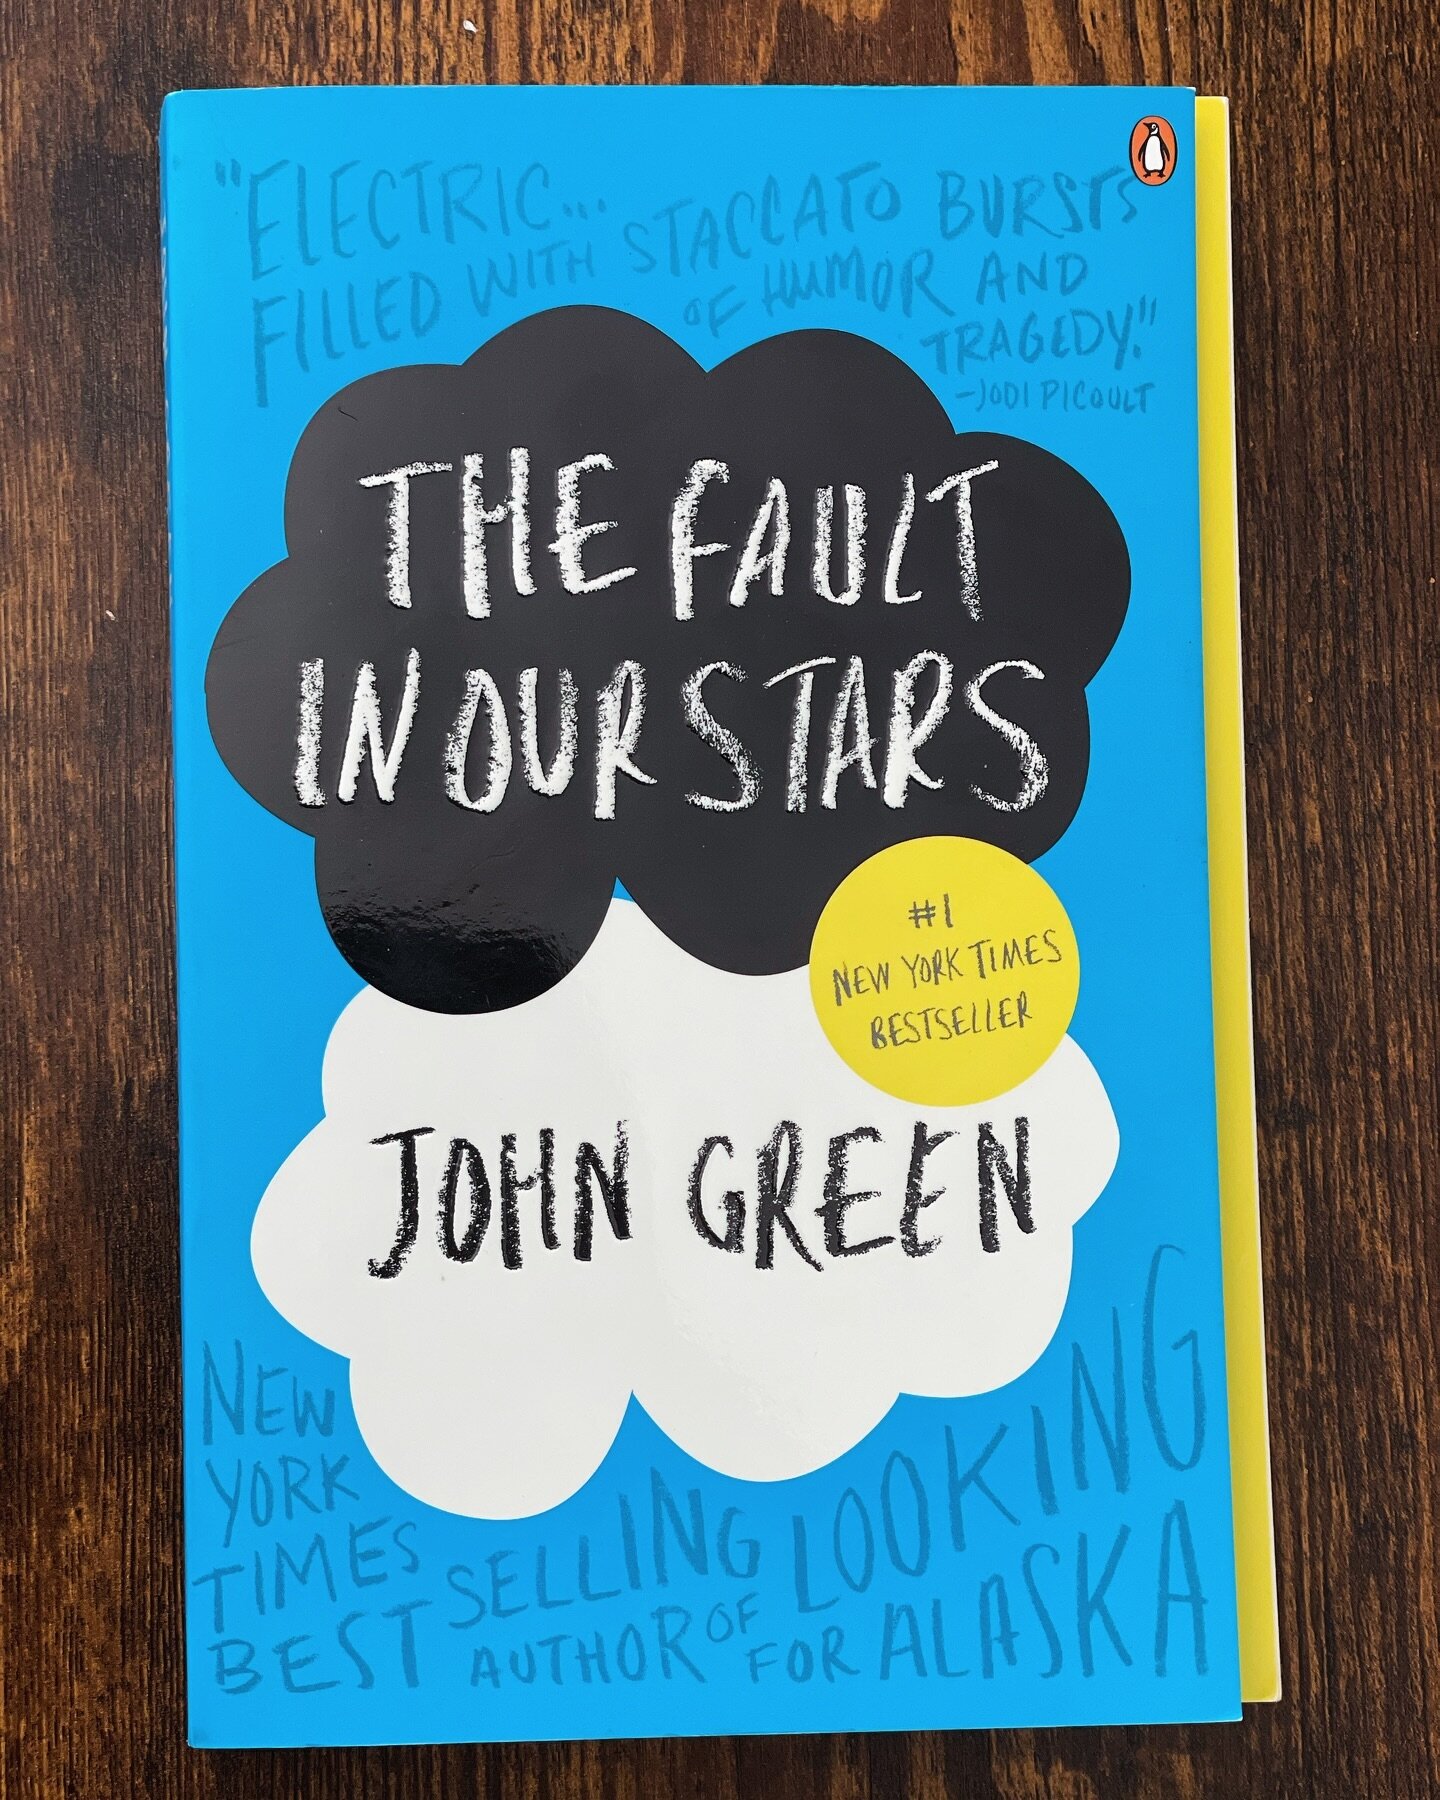 Finally got around to reading The Fault in Our Stars by John Green. I enjoyed it. 🤬 cancer, though. There was something about the dialogue and the speedy relationship that I wasn&rsquo;t fully on board with. Rounded up to 4 🌟.

&hellip;
#thefaultin